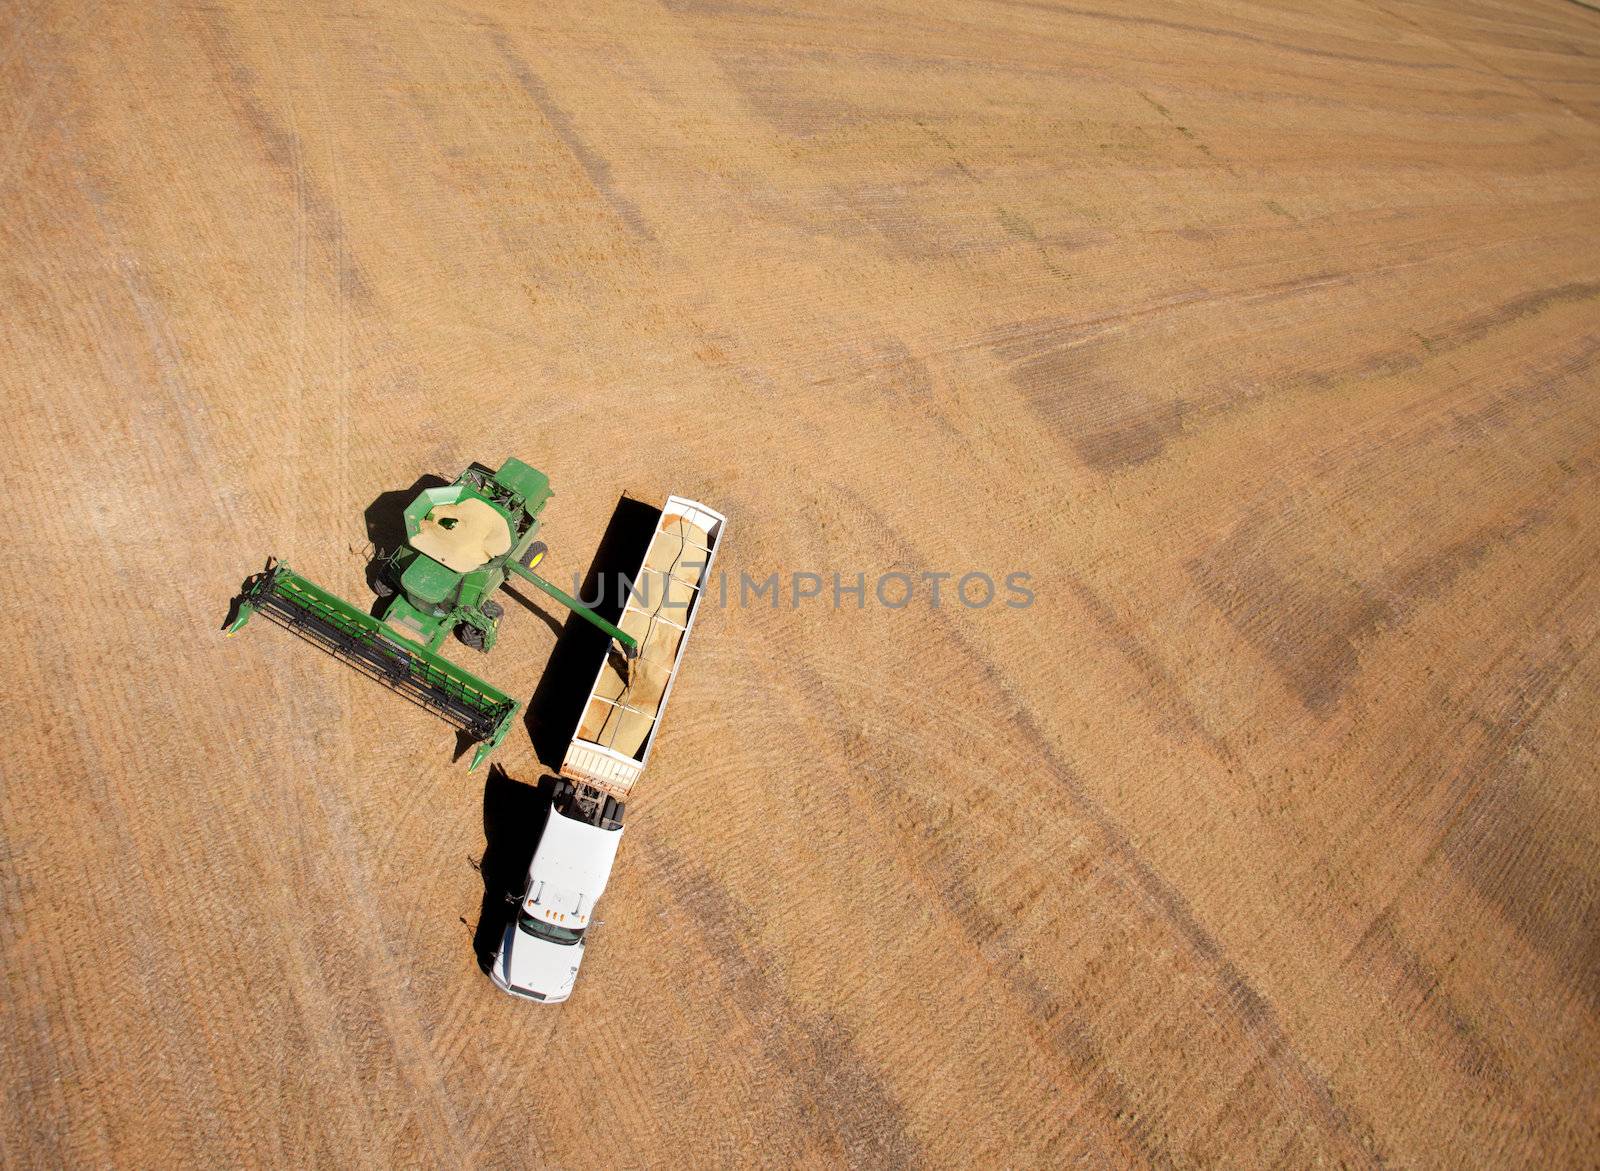 Aerial view of a field being harvested - a combine and truck in the foreground